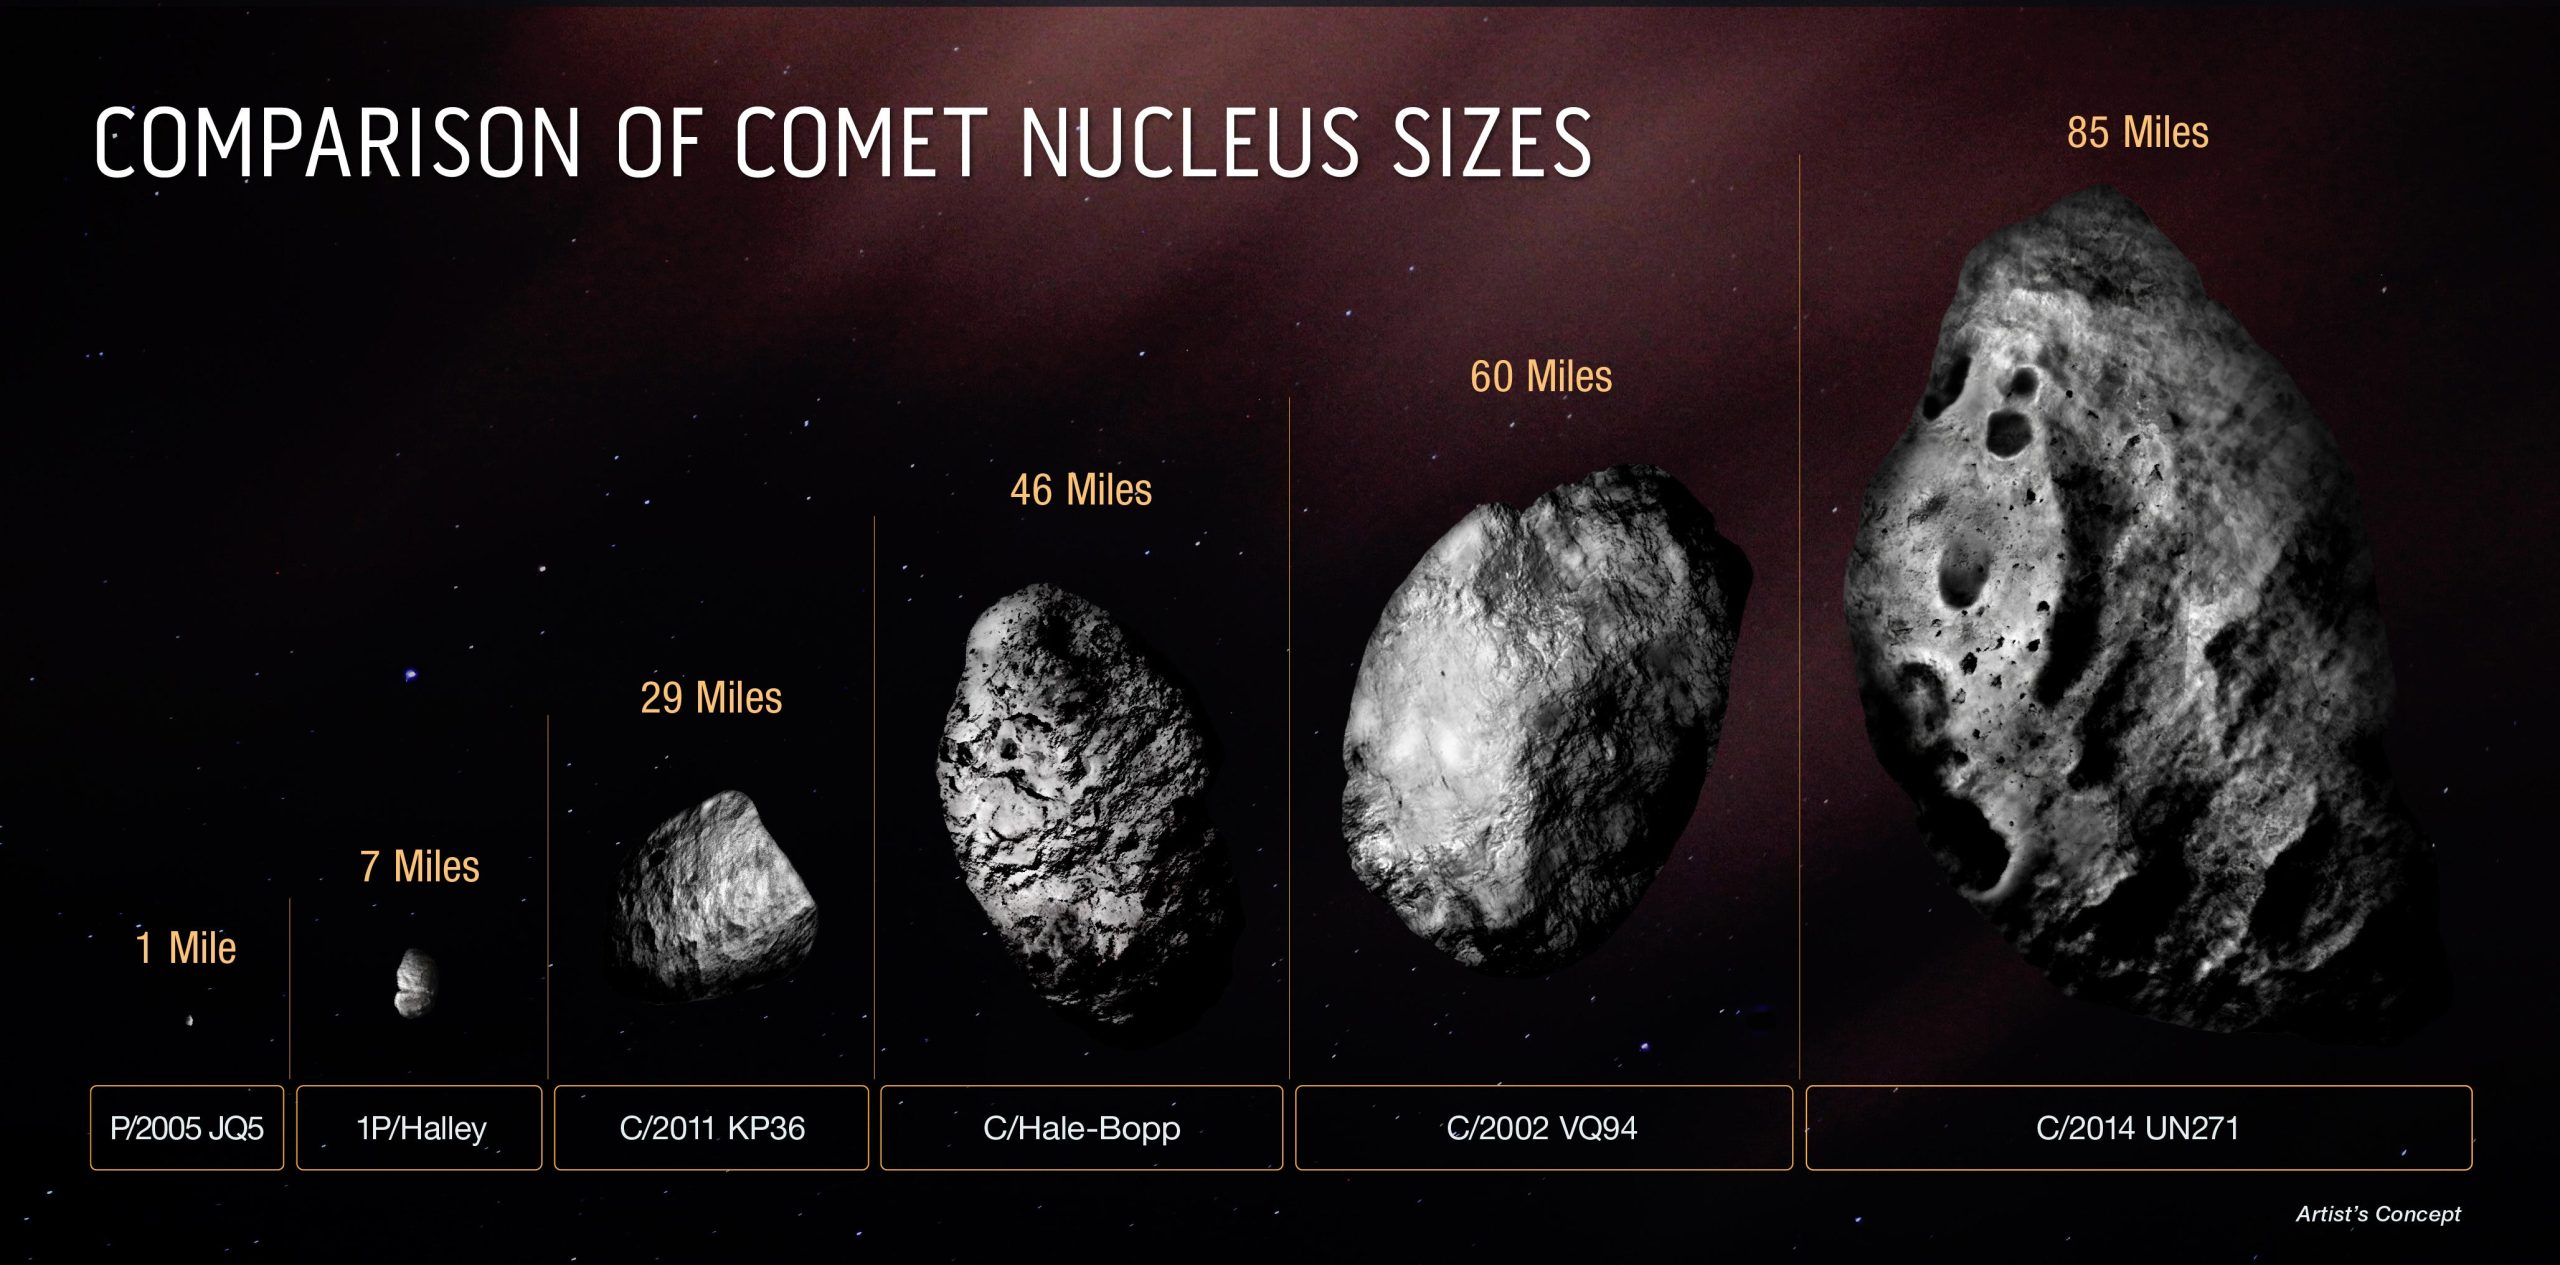 Hubble Confirms Largest Comet Nucleus Ever Seen – A Staggering 500 Trillion Tons Headed This Approach